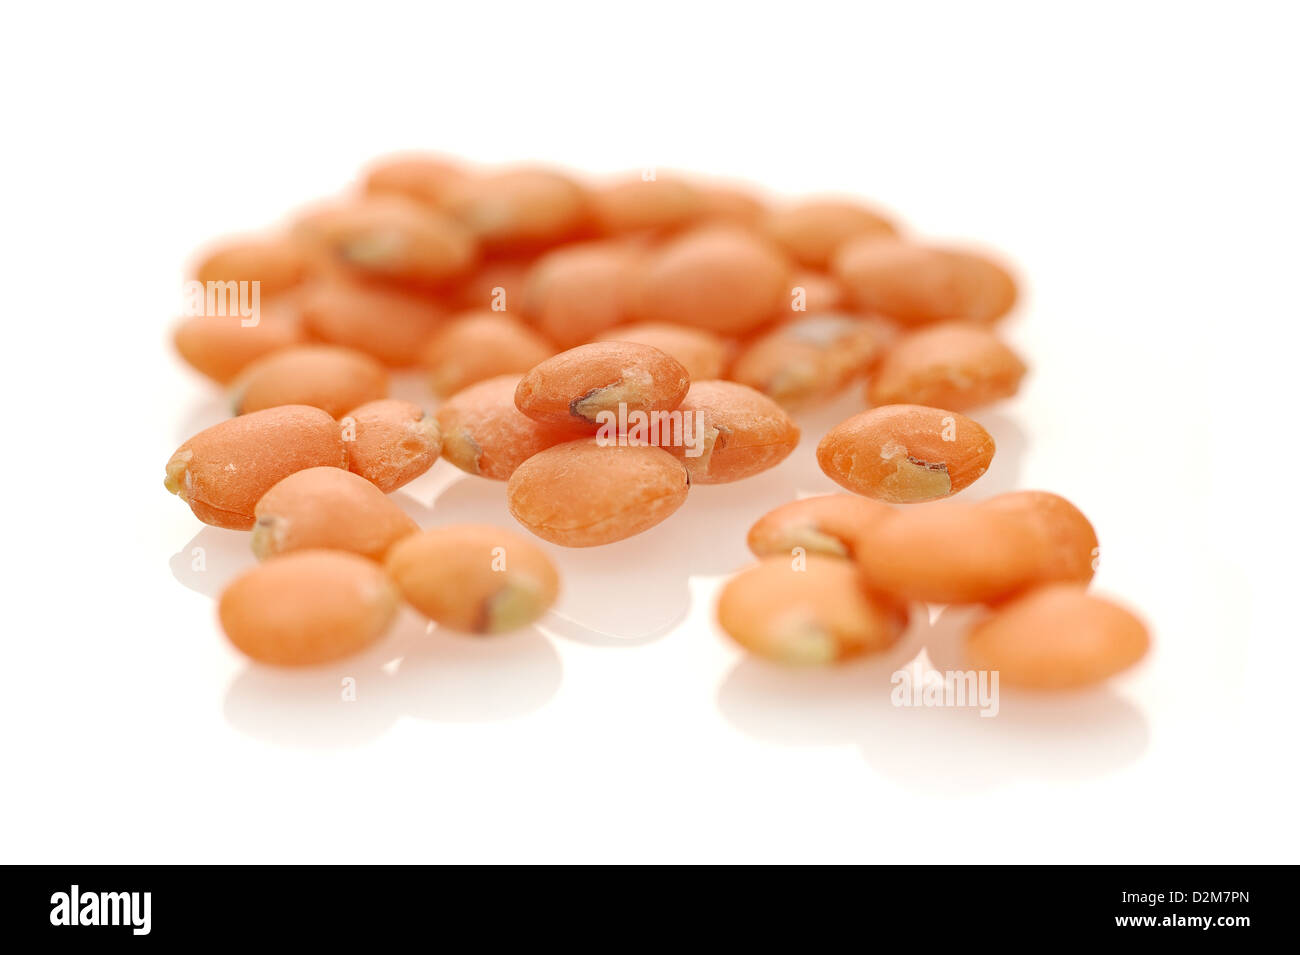 Organic Whole Red Lentils on seamless white background with shadow. Stock Photo